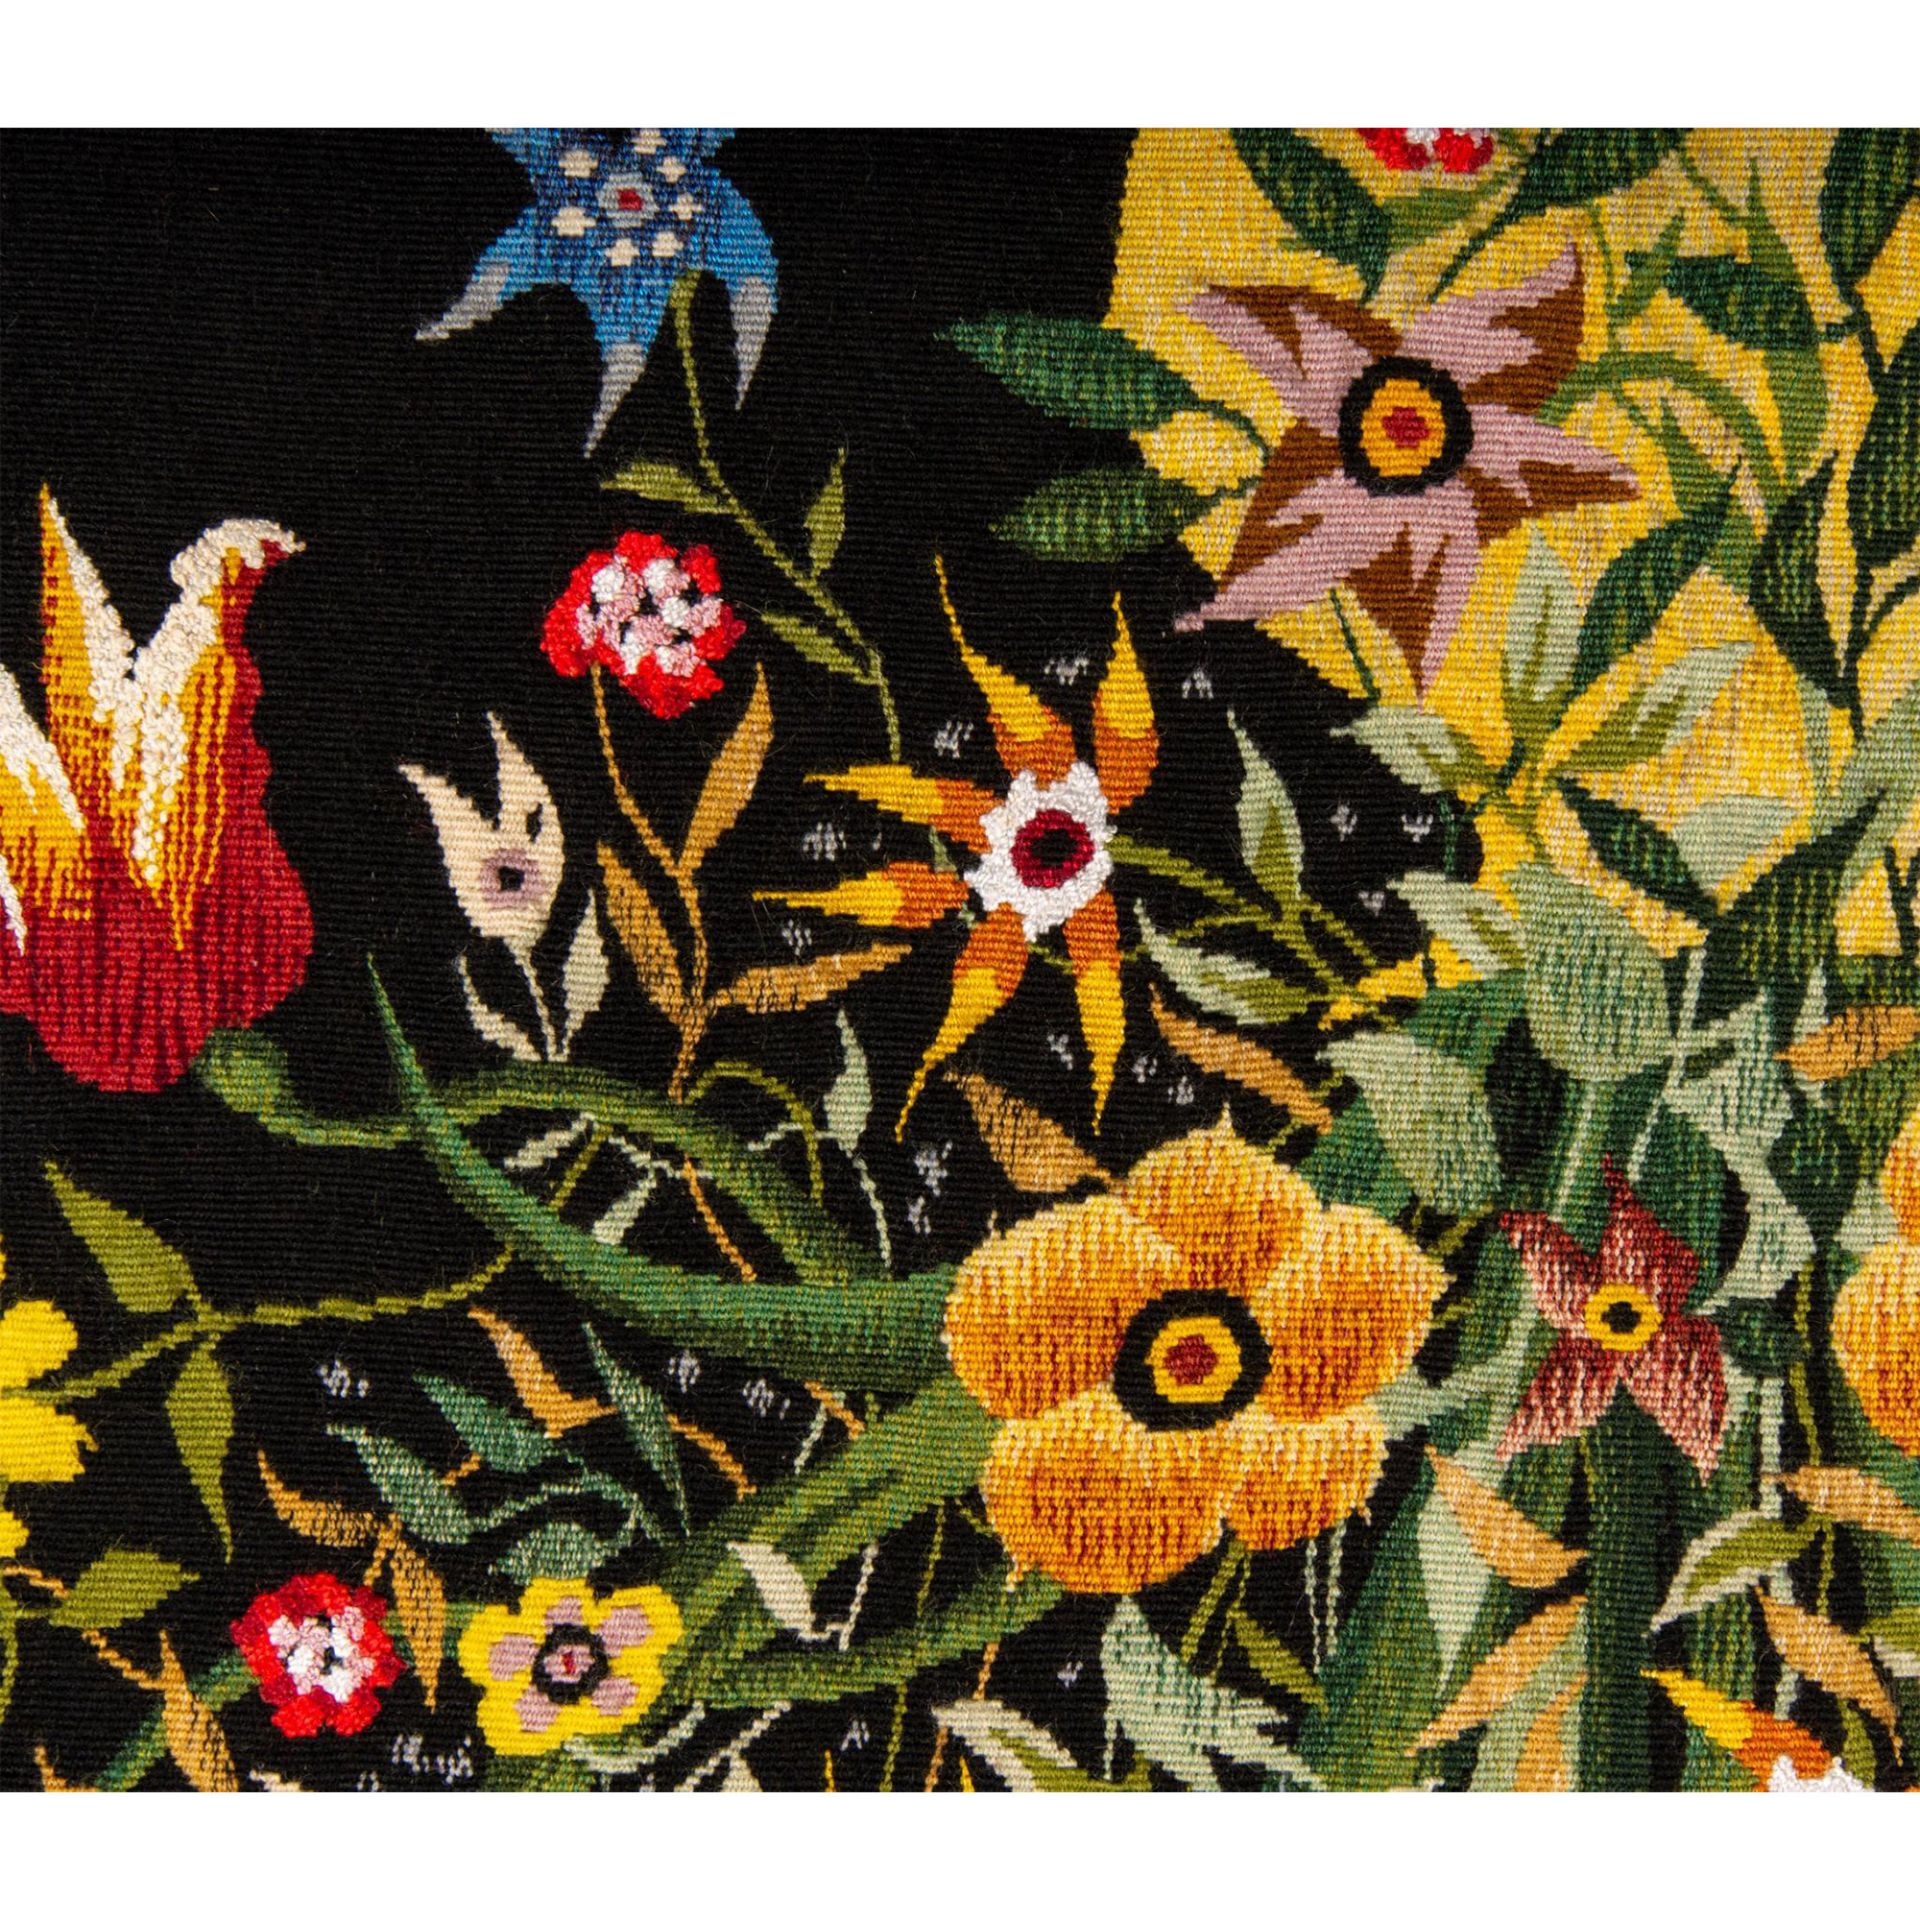 Caly Odette Aubusson Tapestry, A Voix Basse - Image 4 of 11